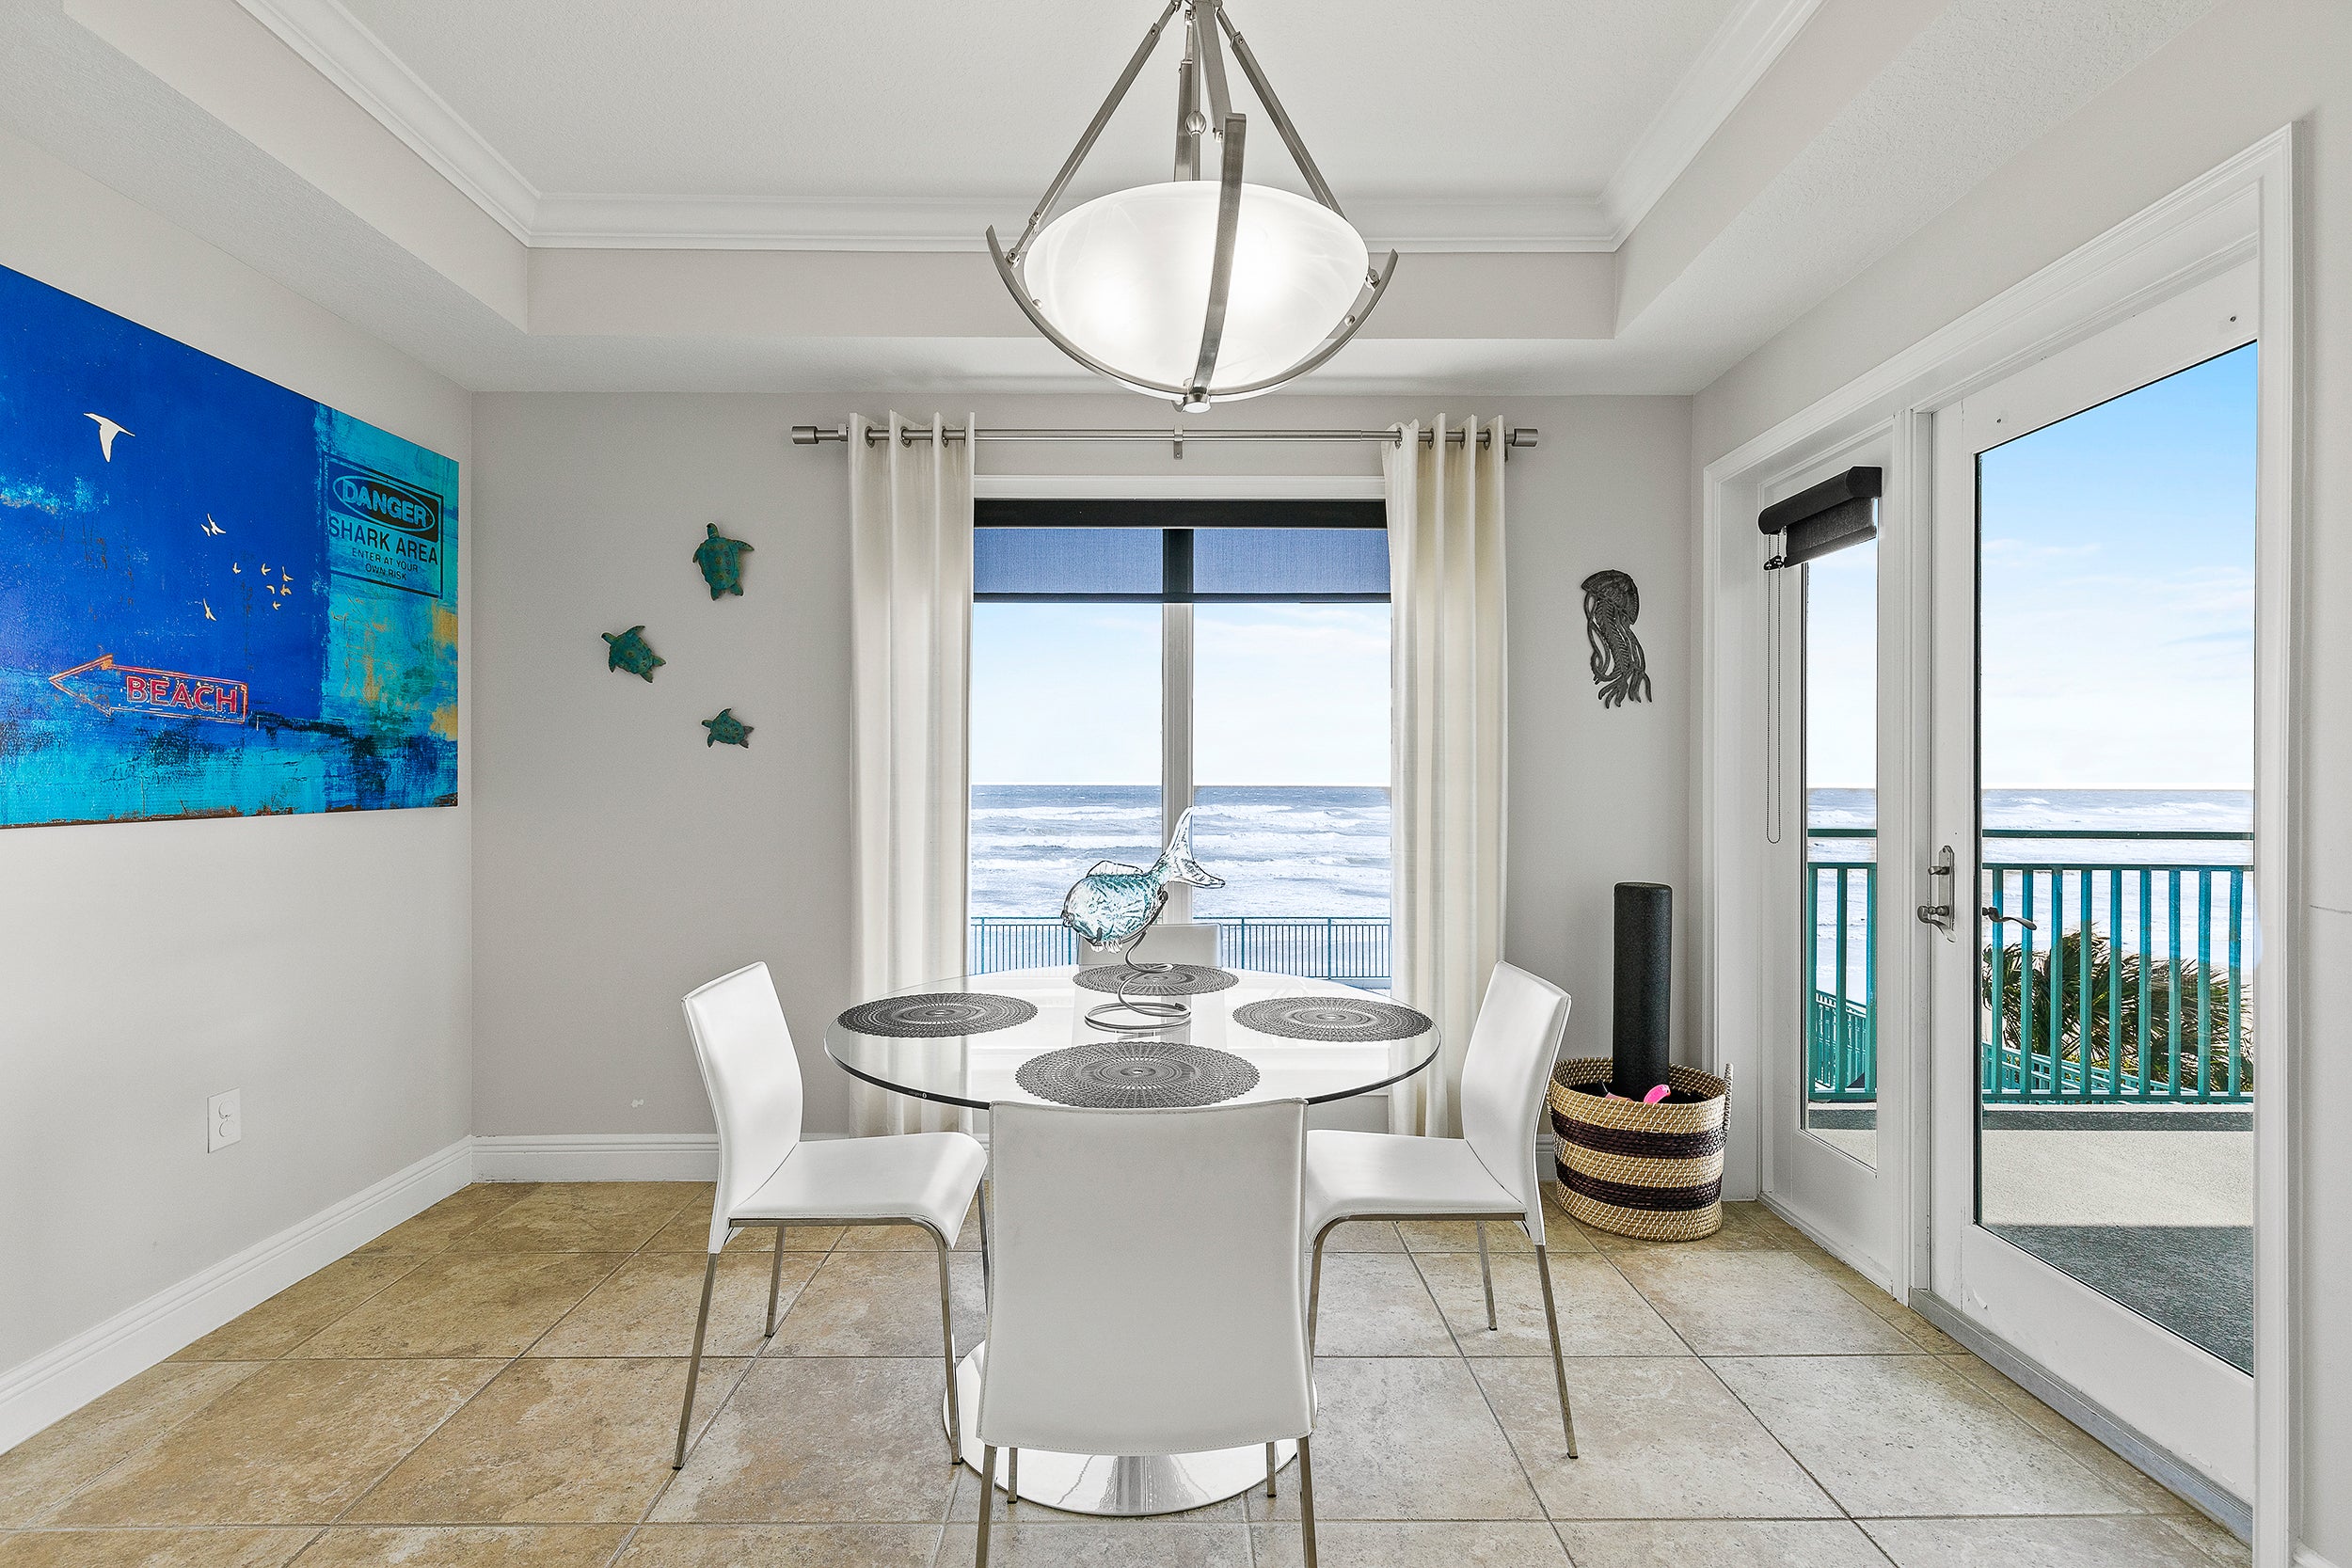 Dining room with ocean views!